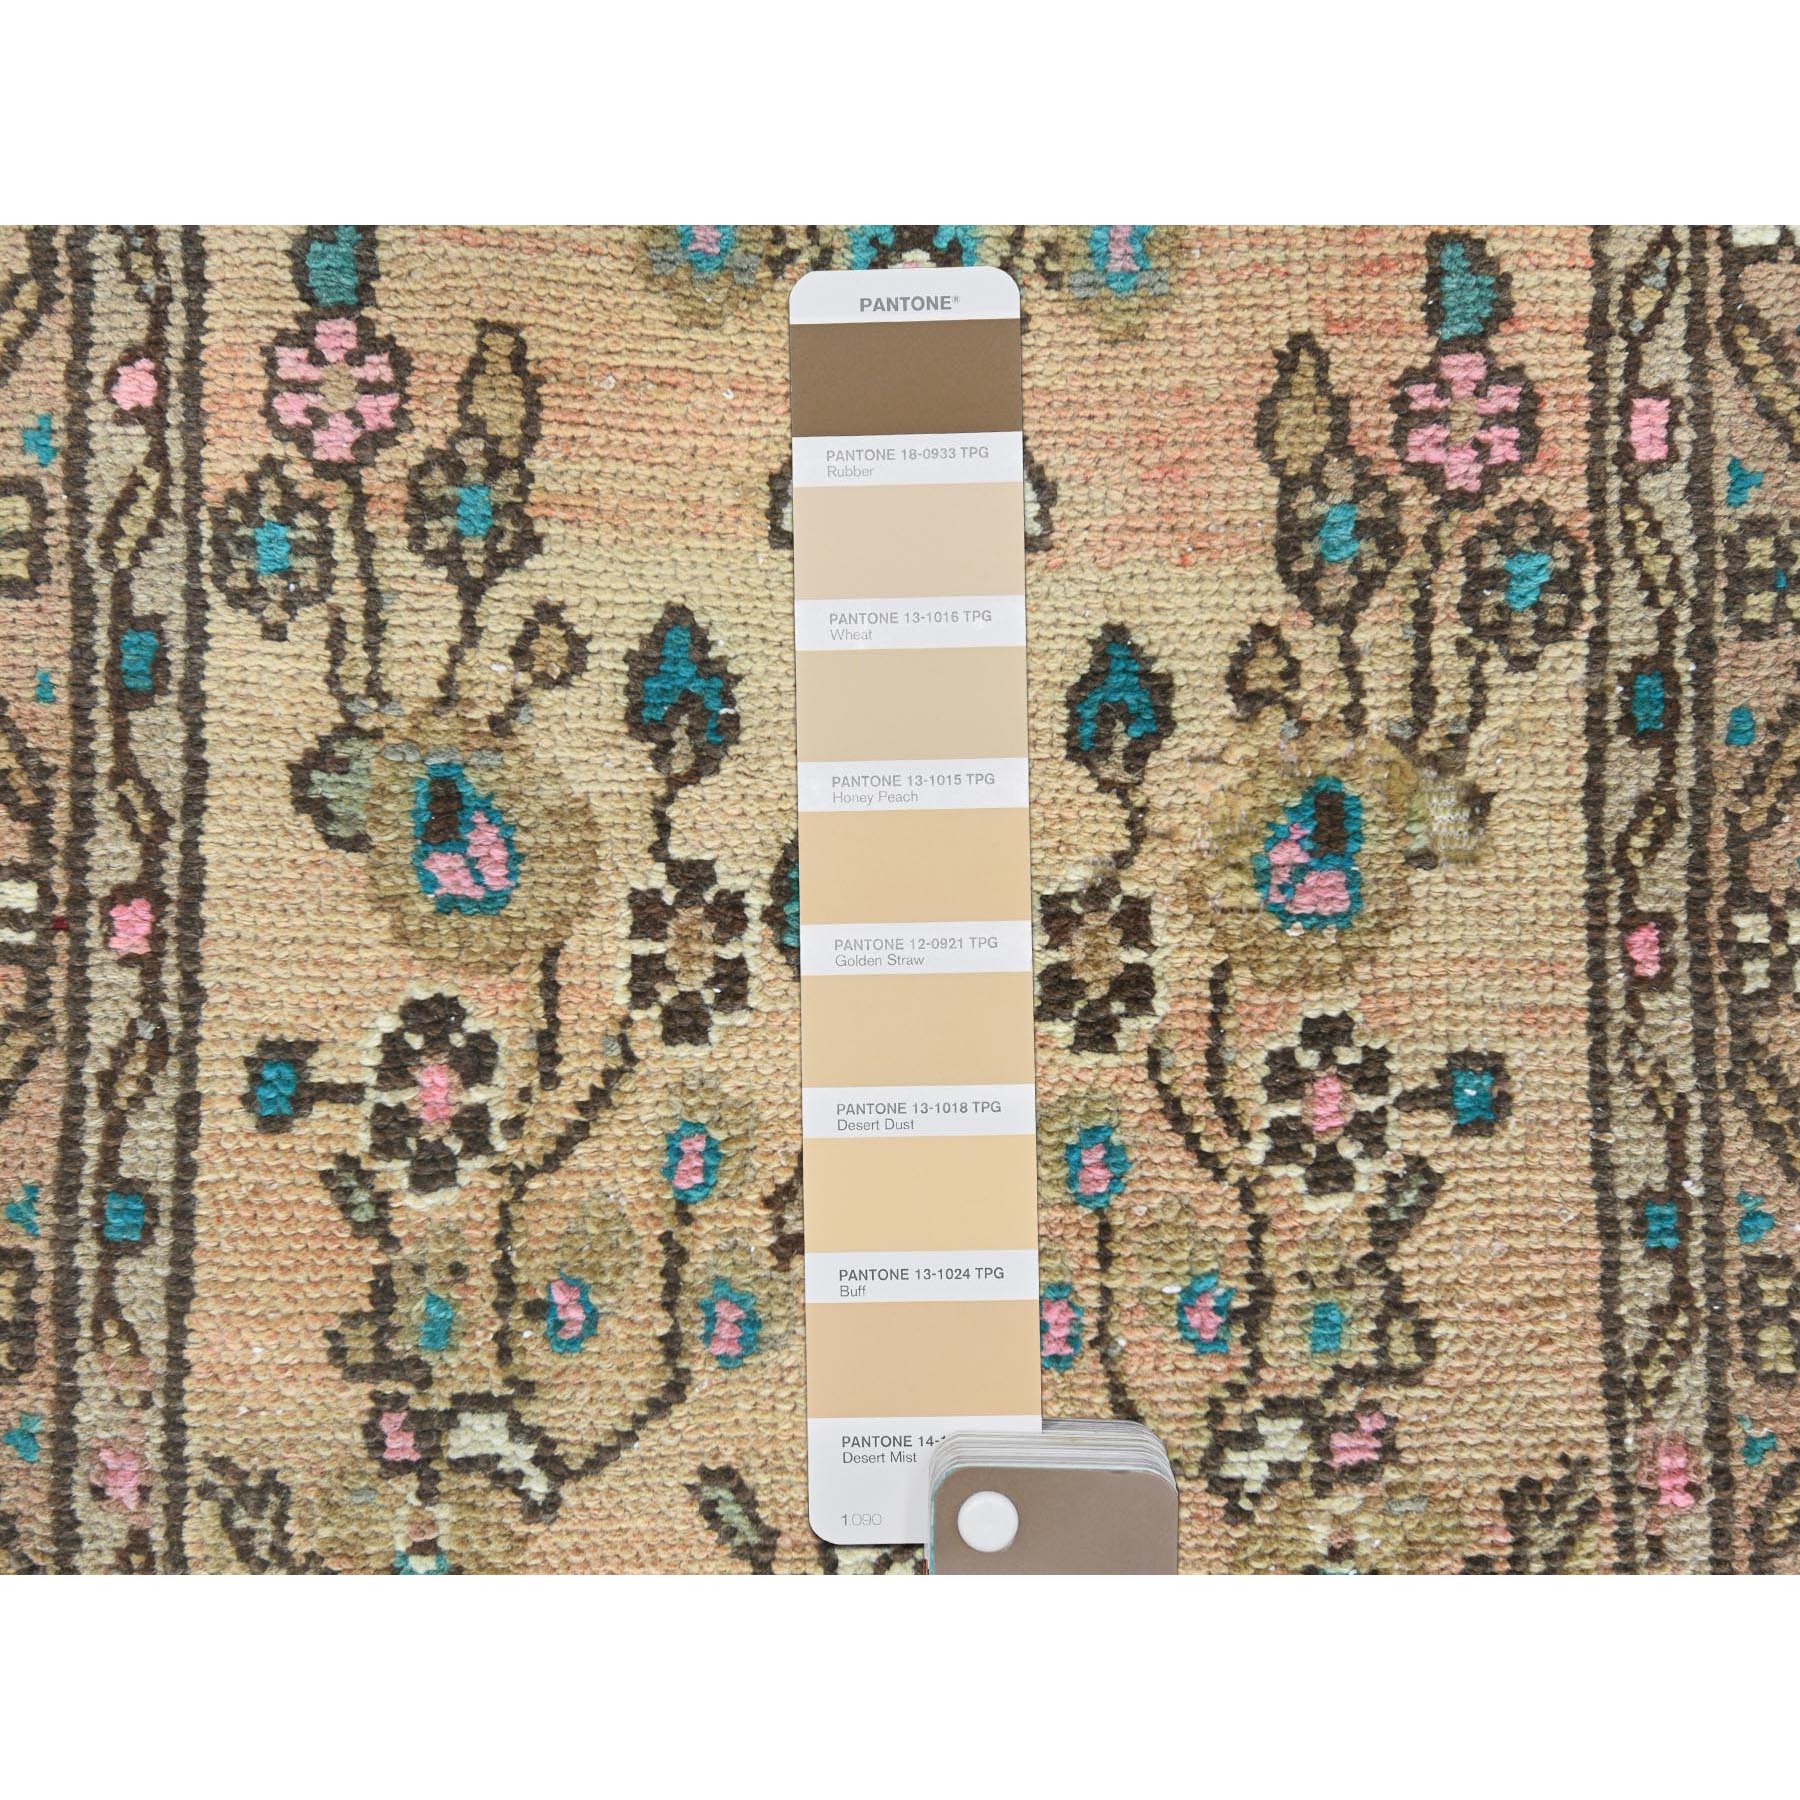 2'1"x8'9" Apricot Color Shades Vintage Persian Bibikabad with All Over Design, Hand Woven, Pure Wool, Distressed Look, Cropped Thin Narrow Runner Oriental Rug 